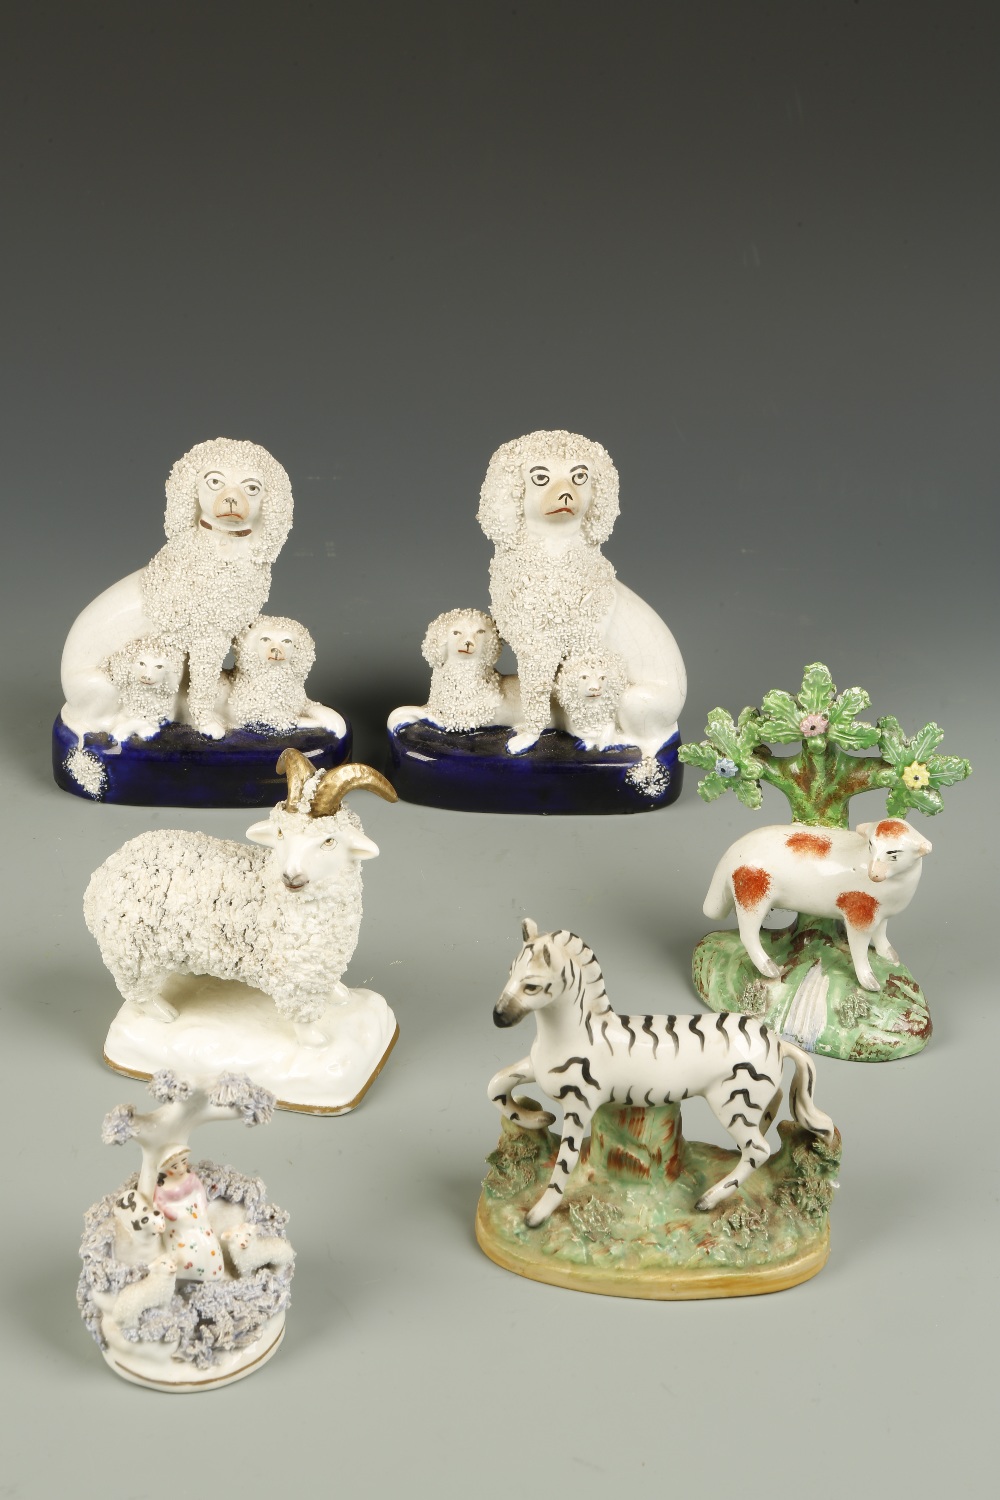 A PAIR OF STAFFORDSHIRE POODLE ORNAMENTS, each with an adult poodle and two puppies, on blue glazed